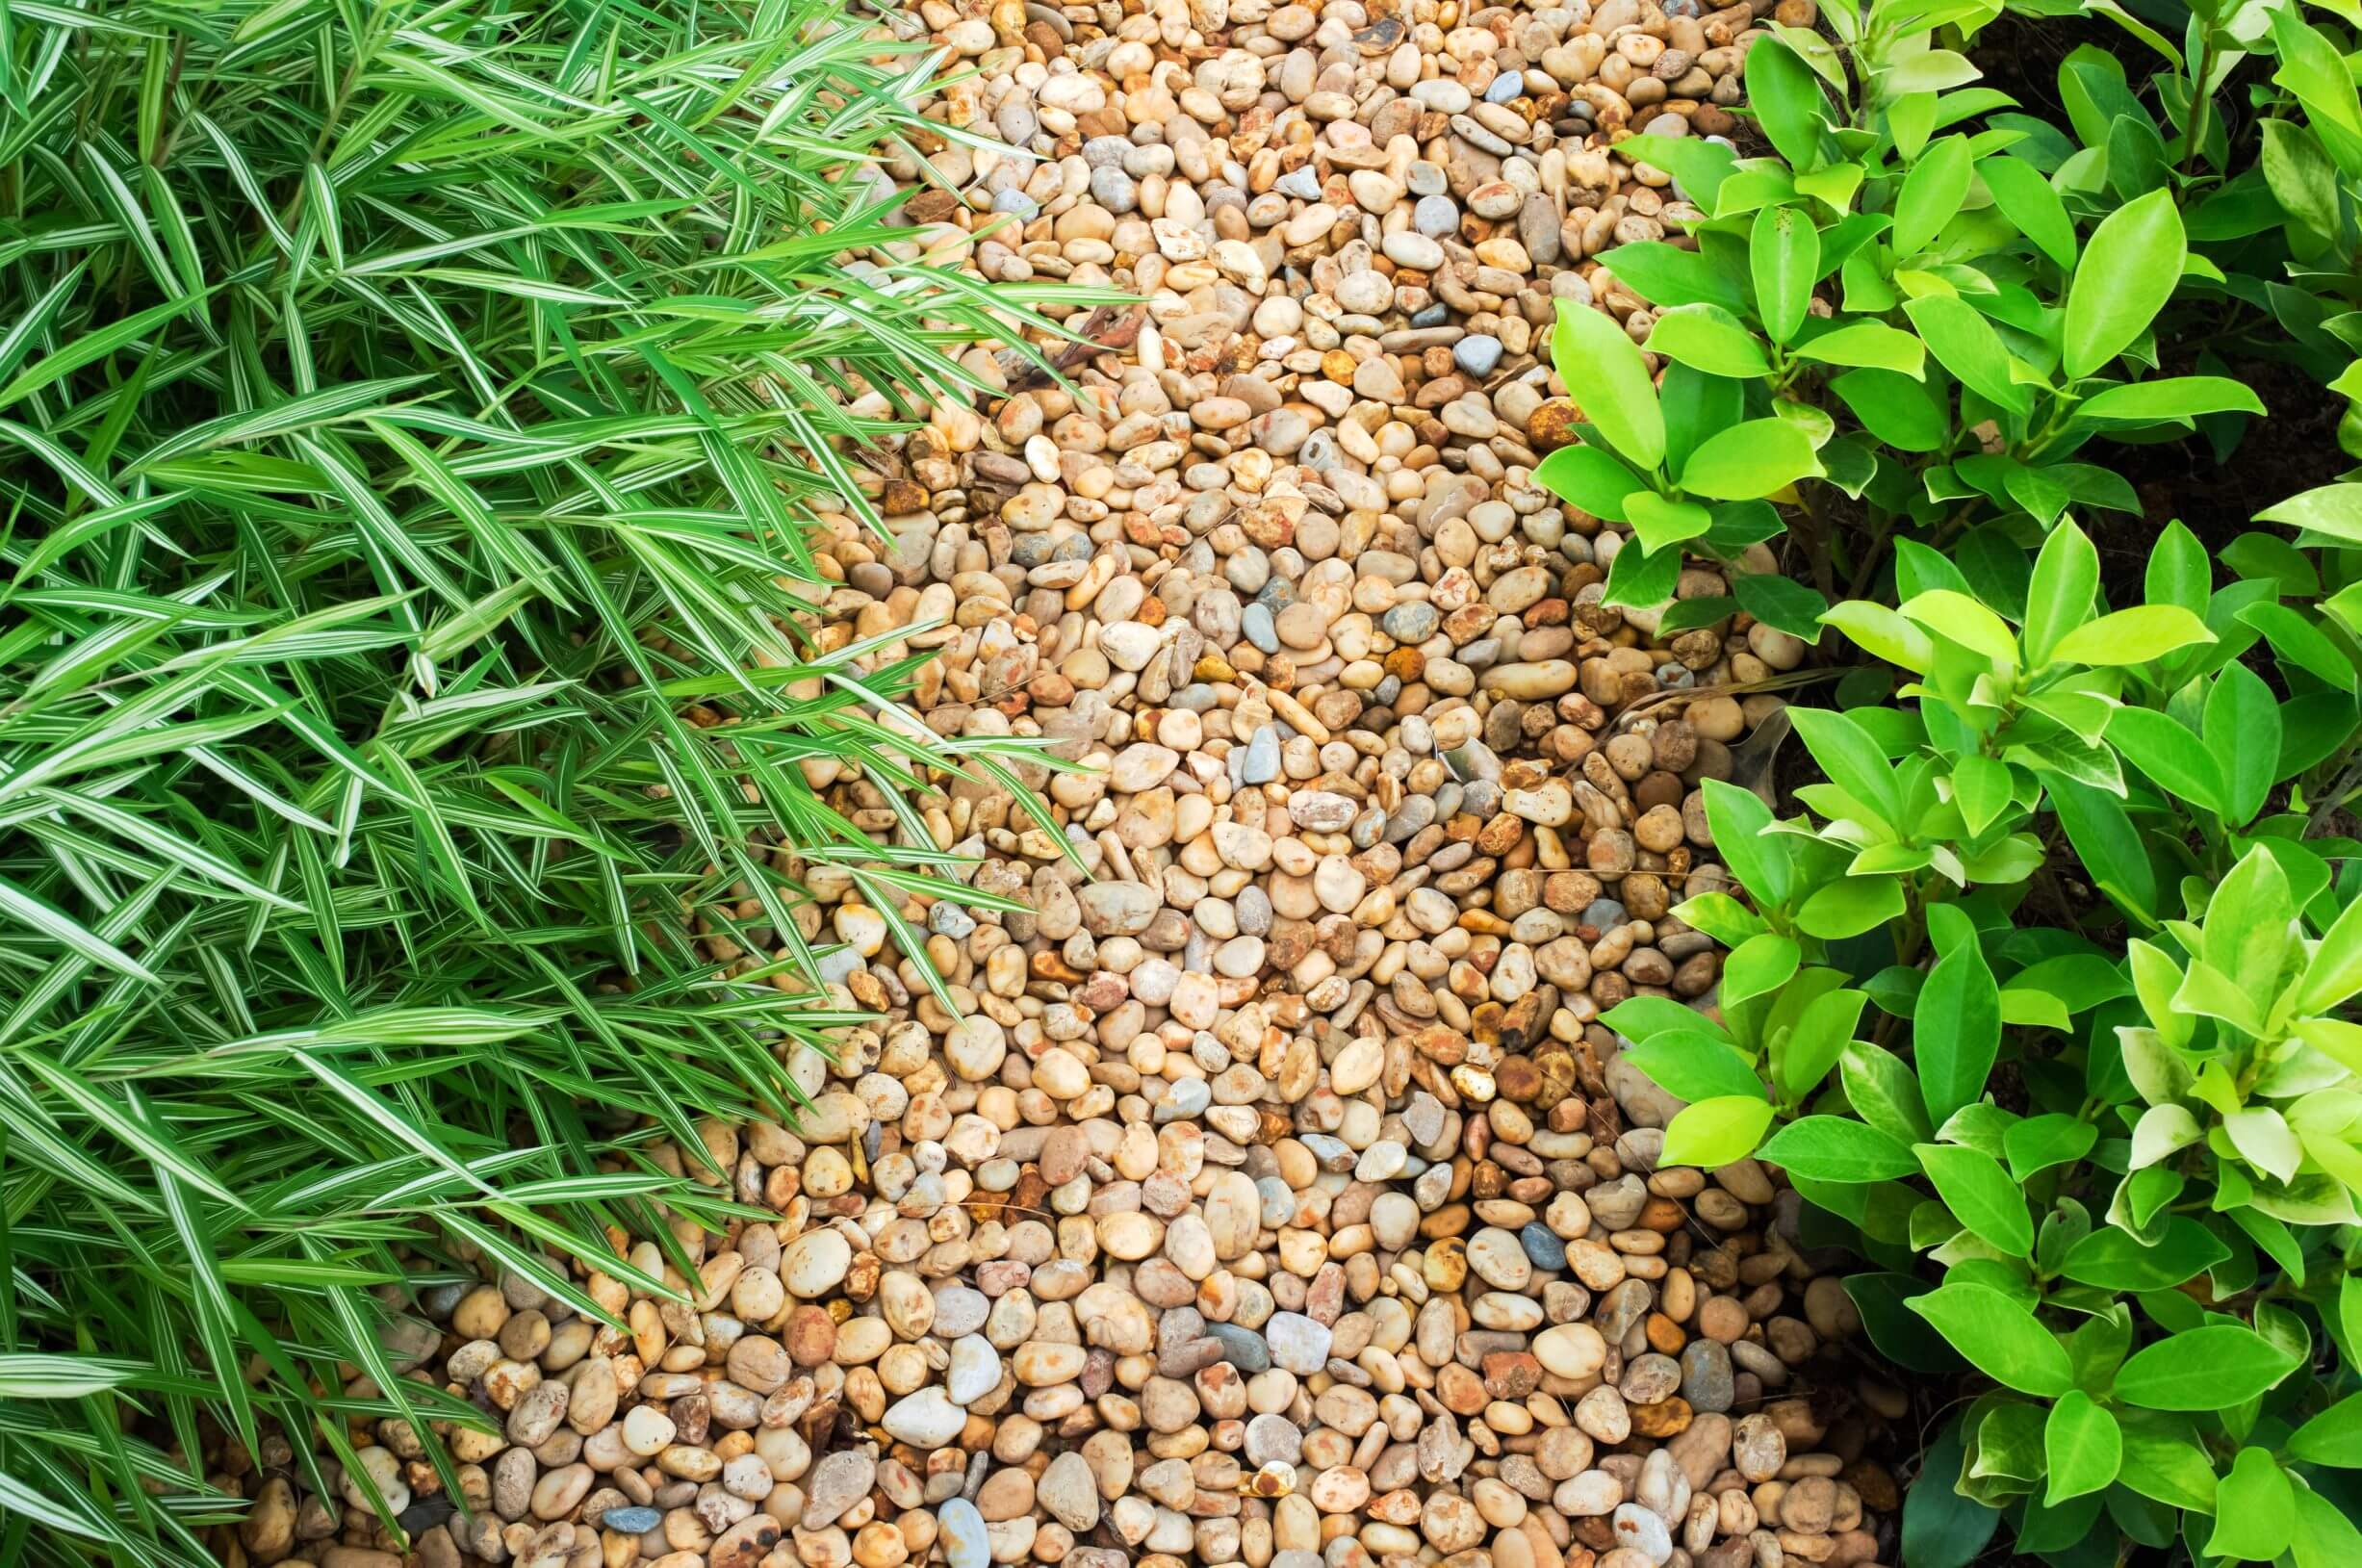 How to clean landscaping stone or pebbles